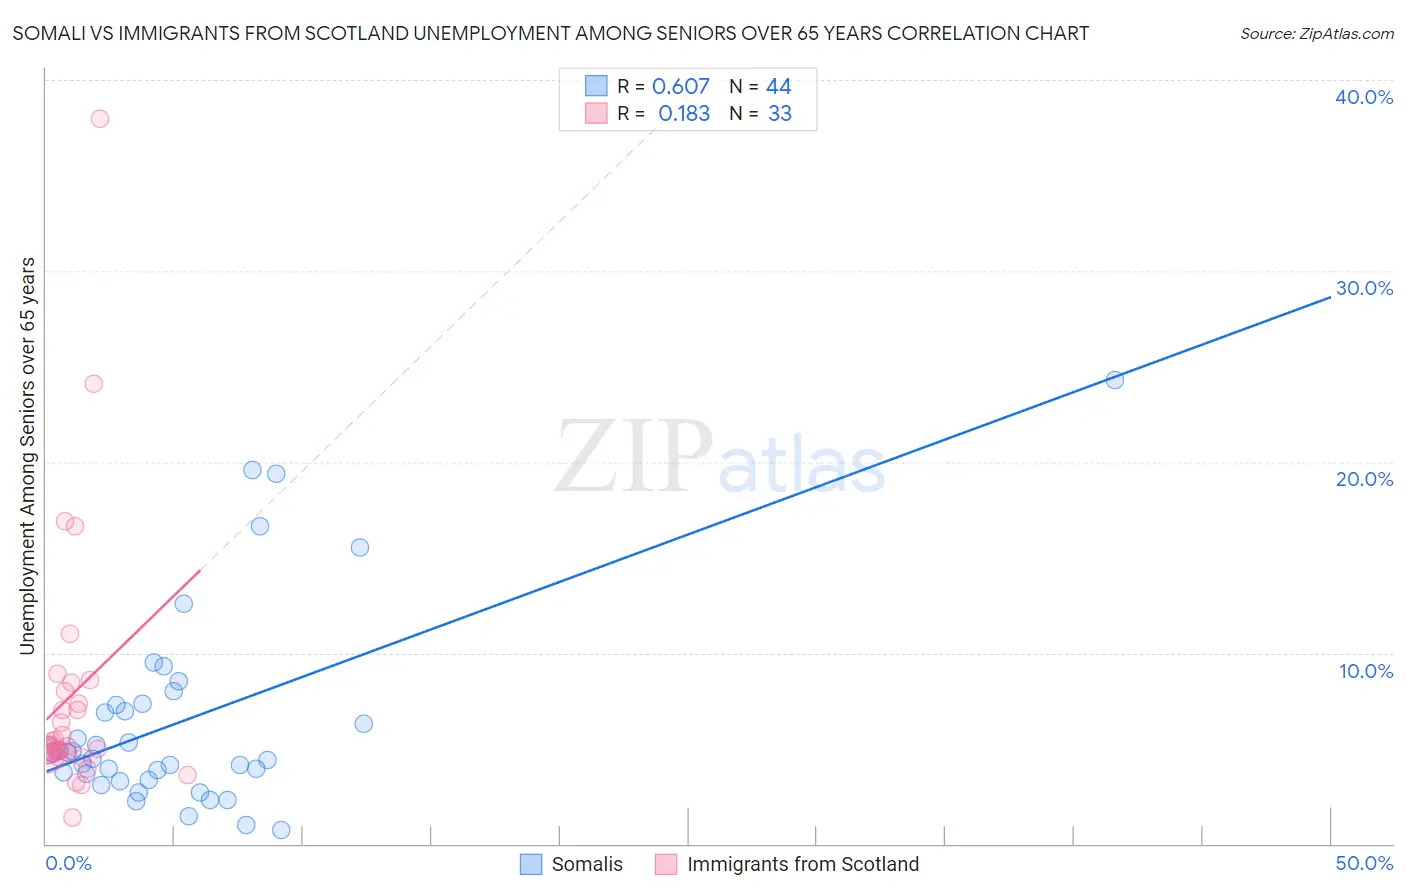 Somali vs Immigrants from Scotland Unemployment Among Seniors over 65 years